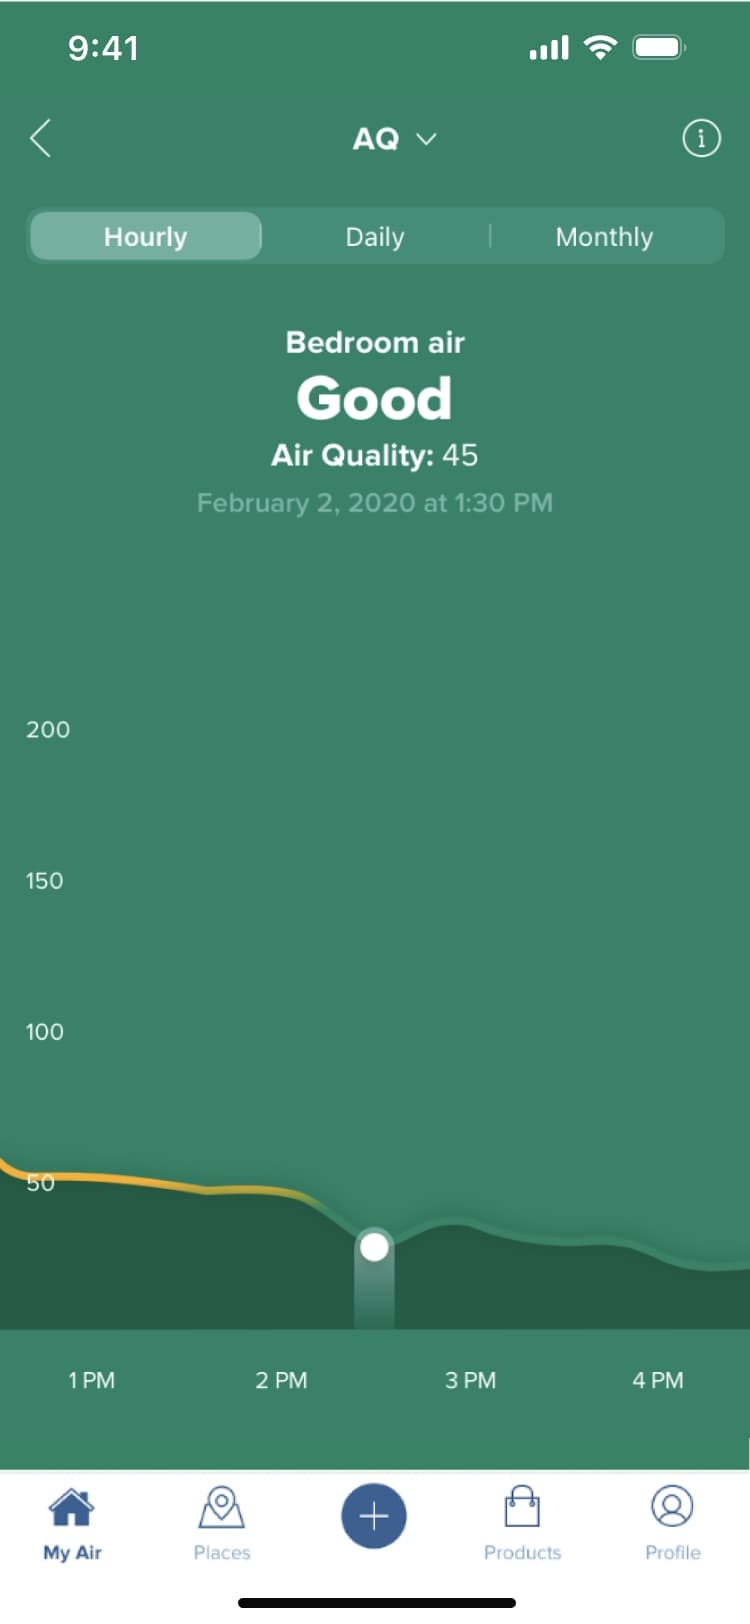 A smartphone screen displaying the 3M Filtrete app with a green background indicating the bedroom air quality is "Good" with a value of 45. The time shown is 9:41.